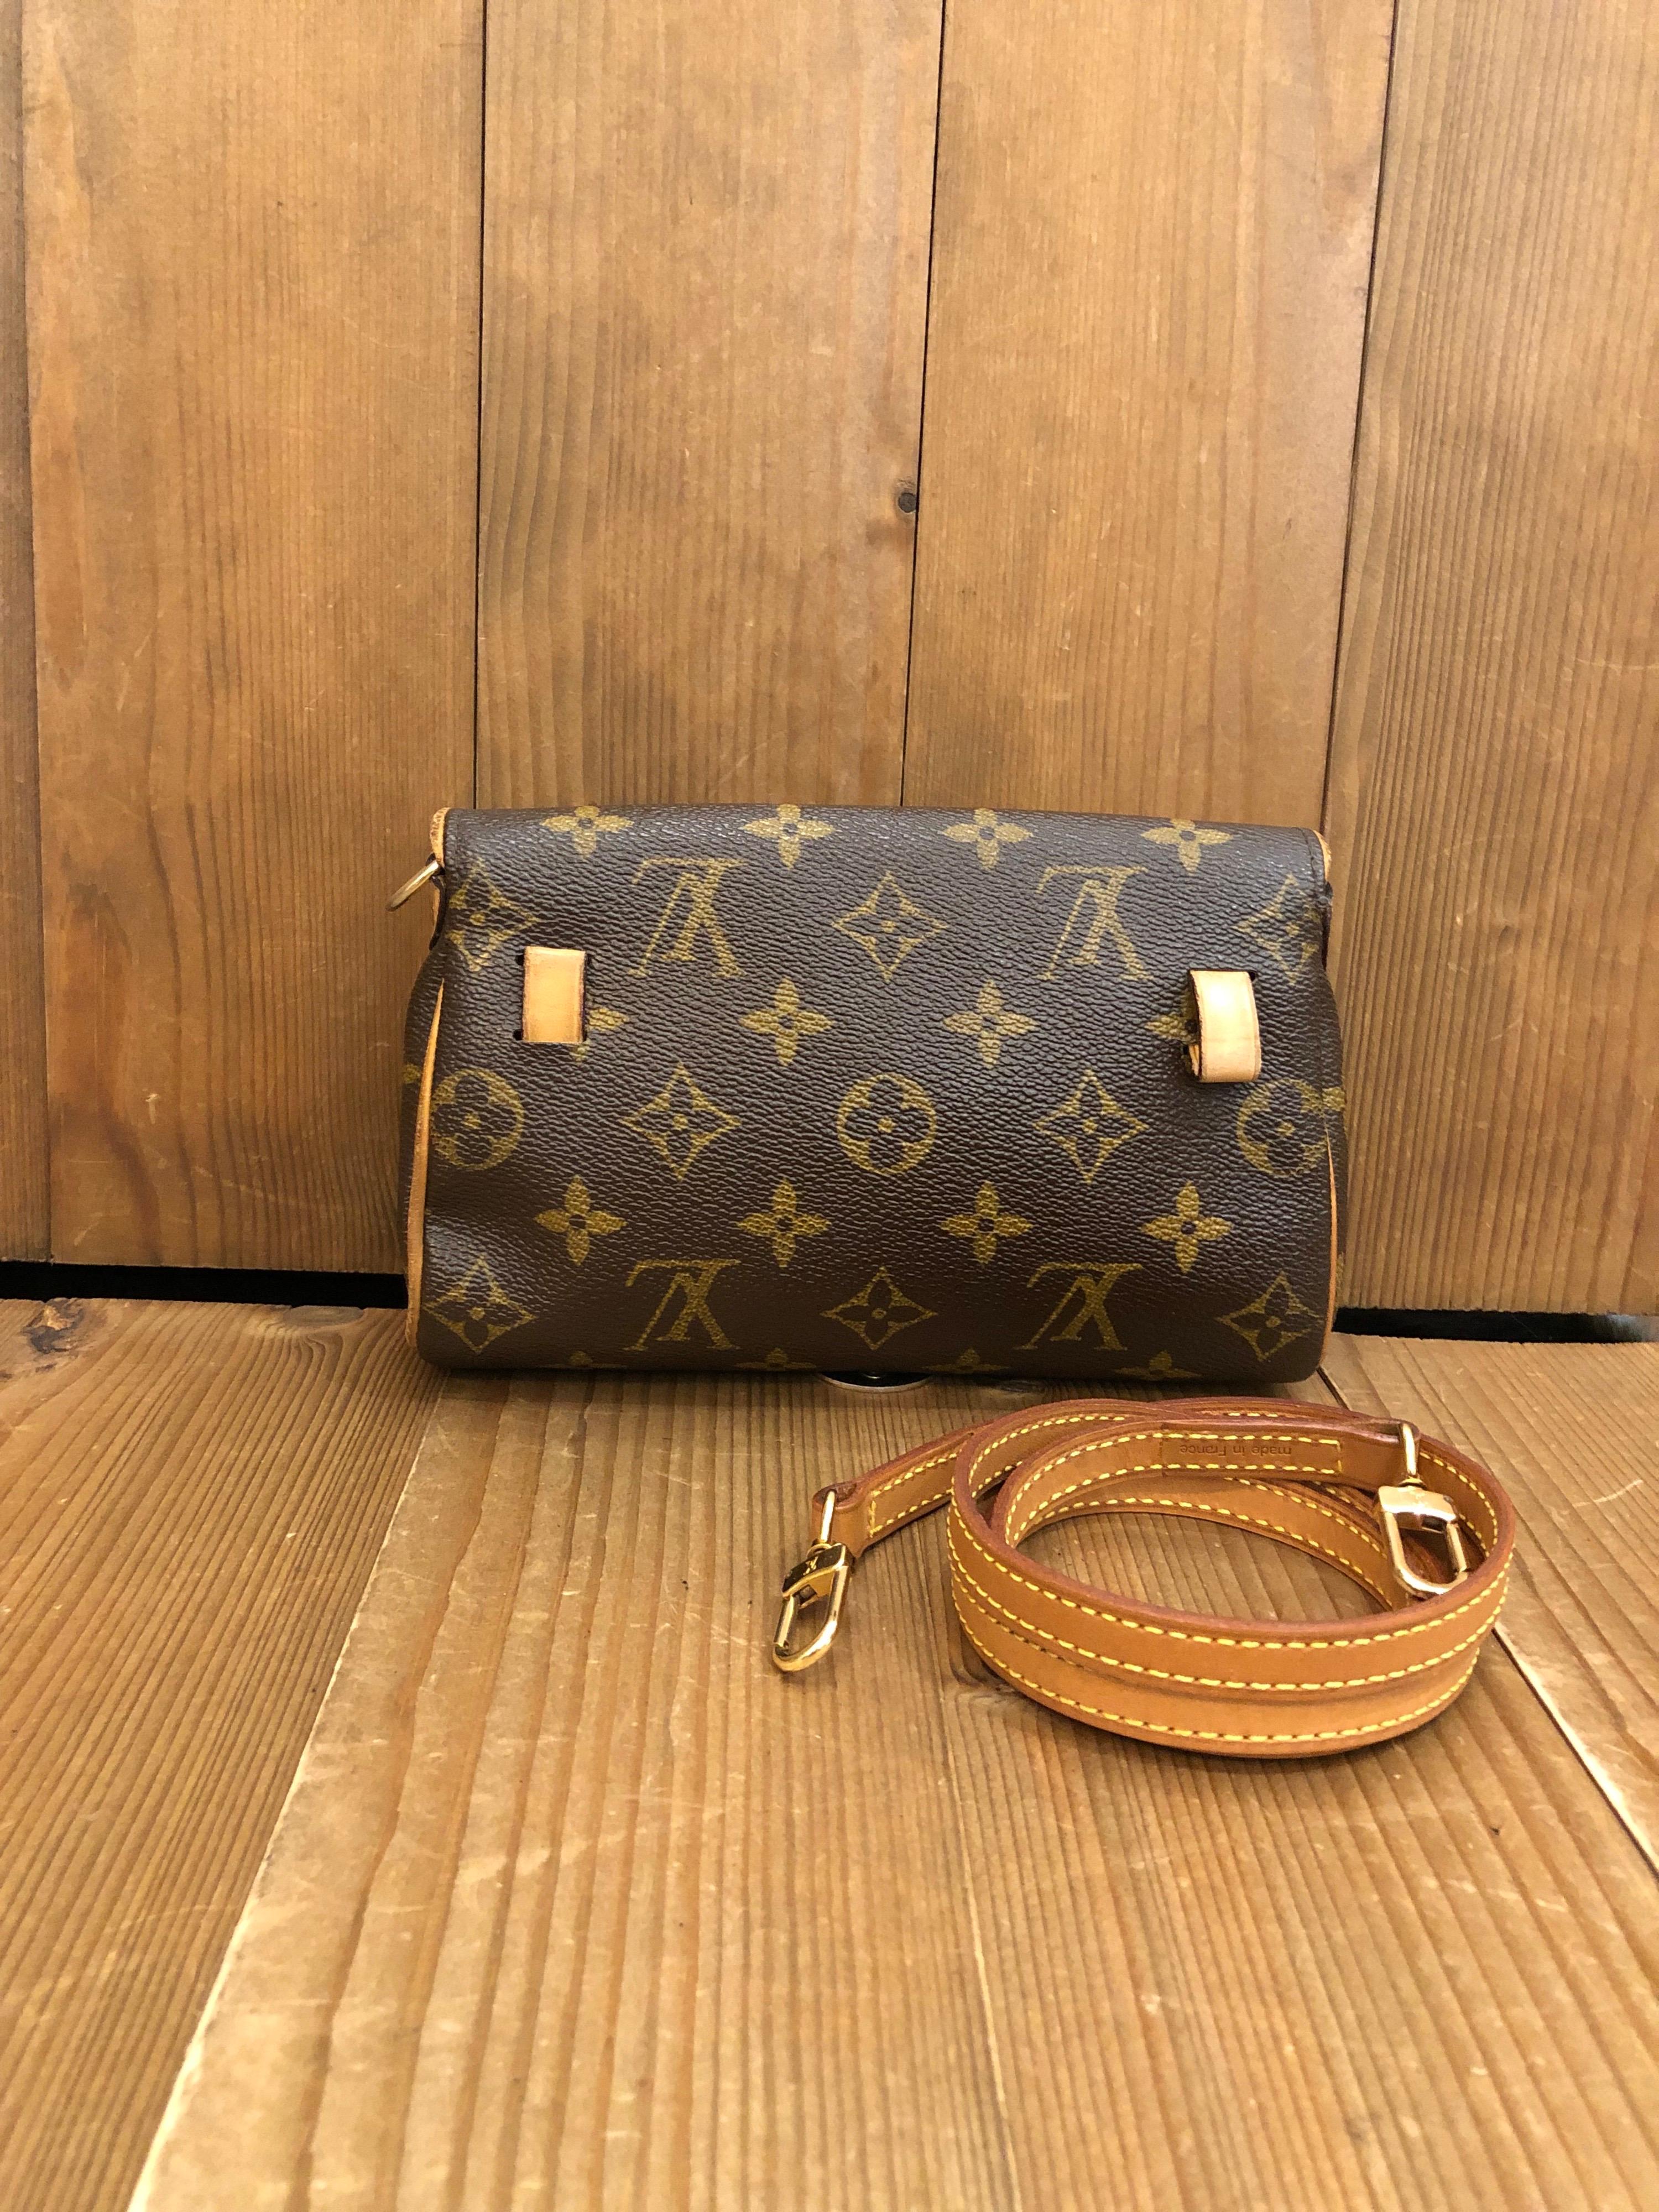 The Louis Vuitton Friendly is the perfect bag to carry all your small personal items around. This bag has belt loops on the back for a leather waist strap so that you can use it as a belt bag (Please note that this bag does not come with the waist